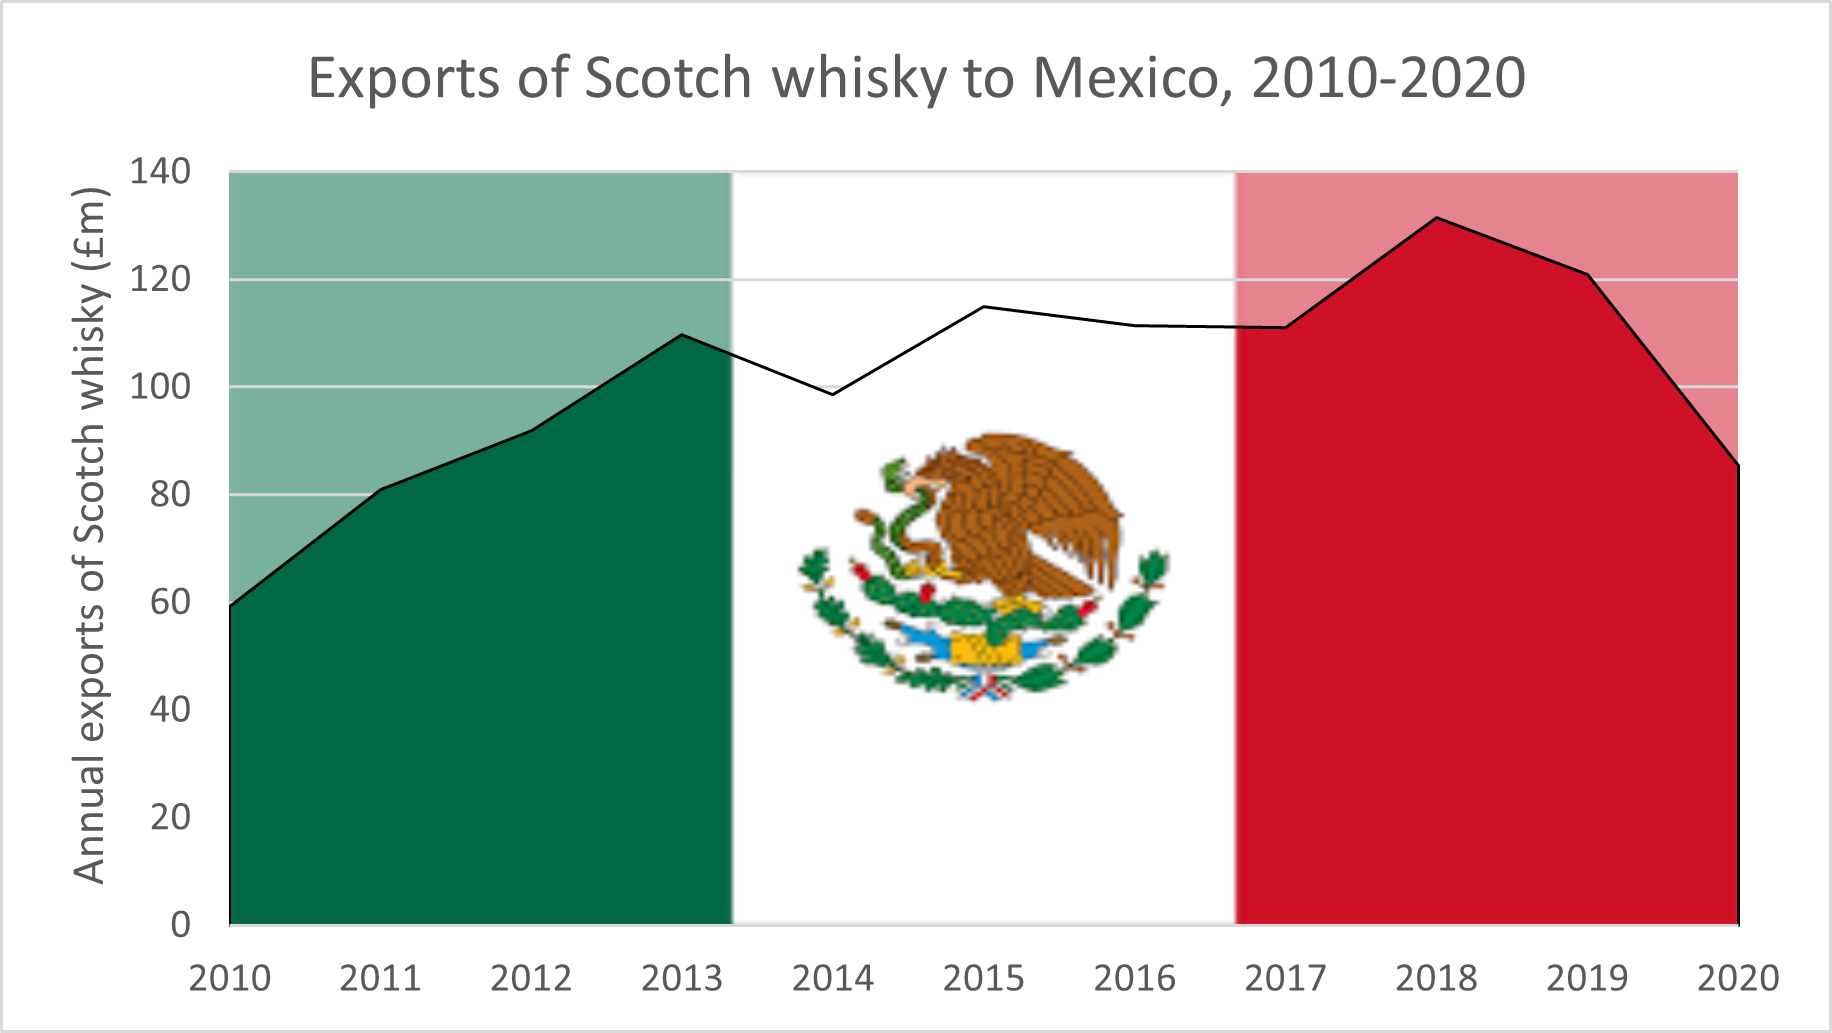 After solid growth over the last 10 years, Scotch sales in Mexico have been hit hard by COVID